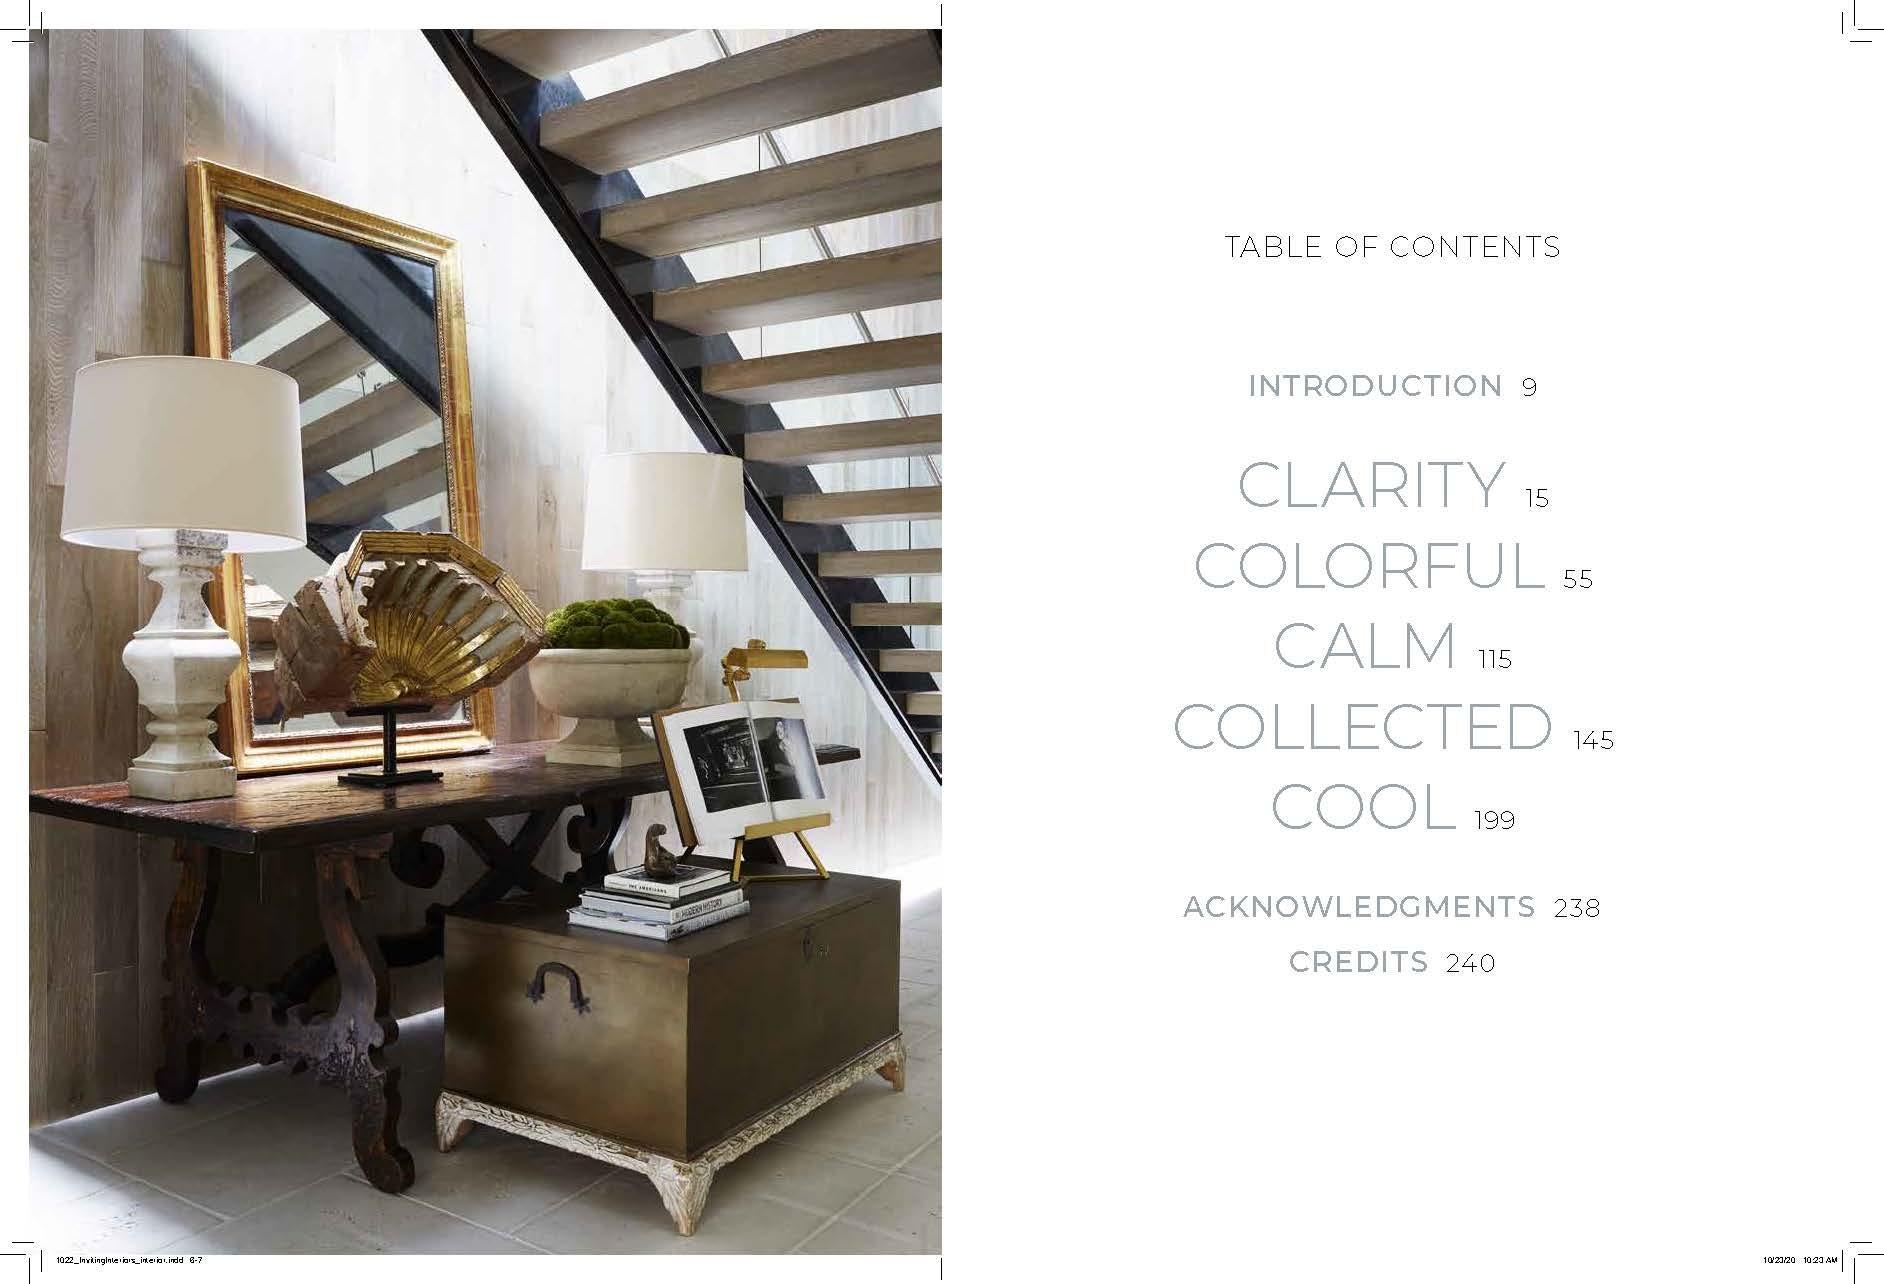 Written by Melanie Turner

The first book from Atlanta interior designer Melanie Turner, whose pretty work has a modern edge.

Inspired by fashion and borrowing a palette from nature, Melanie Turner's interiors possess a timeless quality that